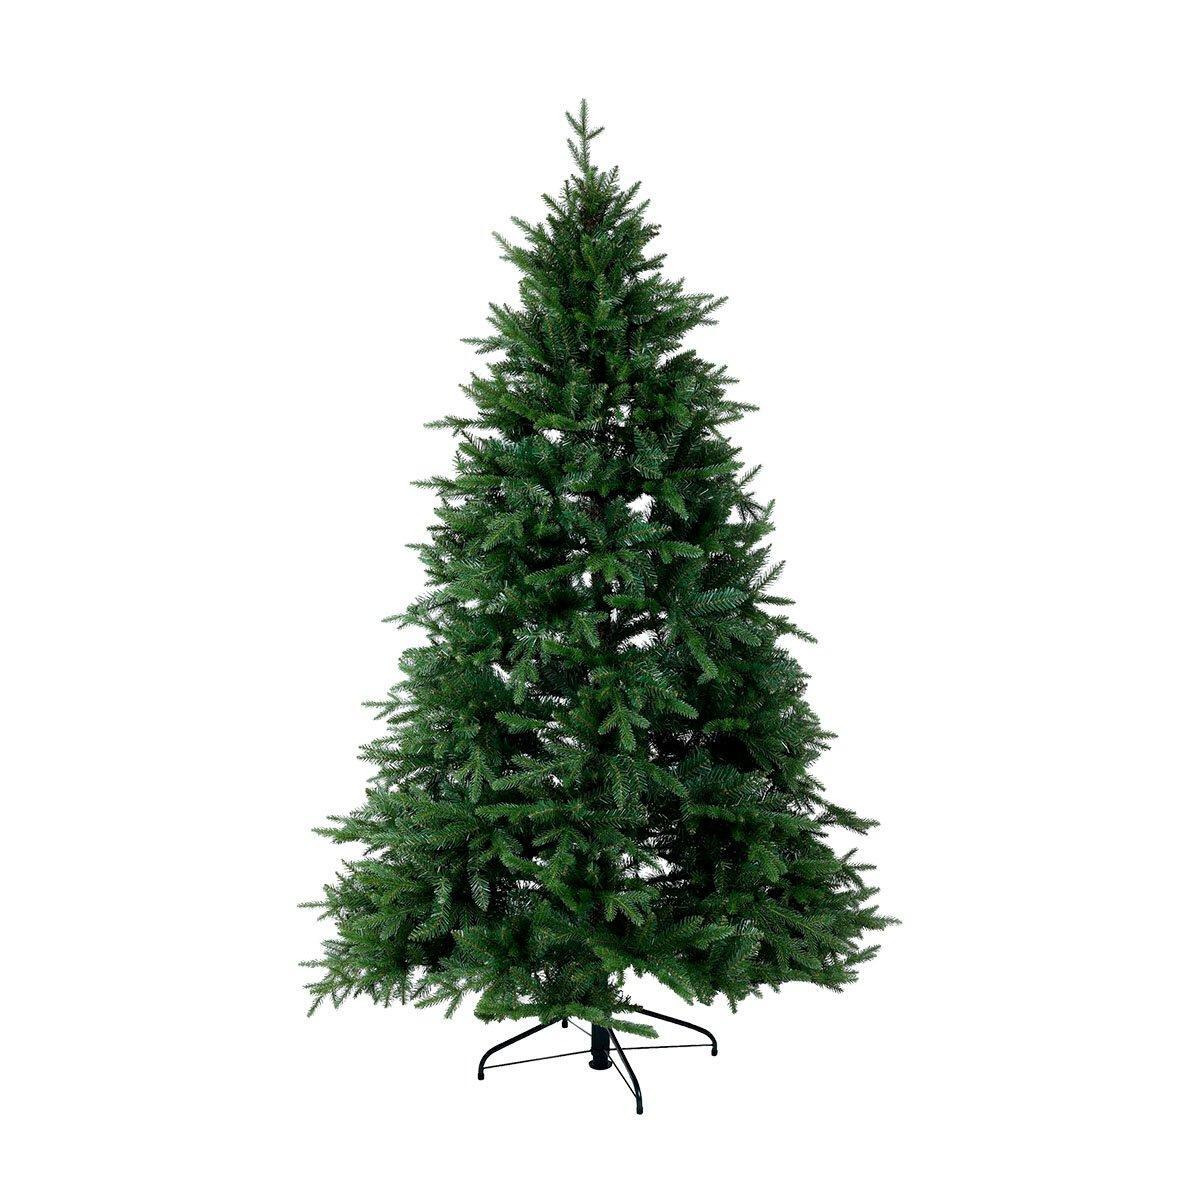 Luxury 7ft Faux Nordic Spruce Hinged Christmas Tree Artificial - image 1